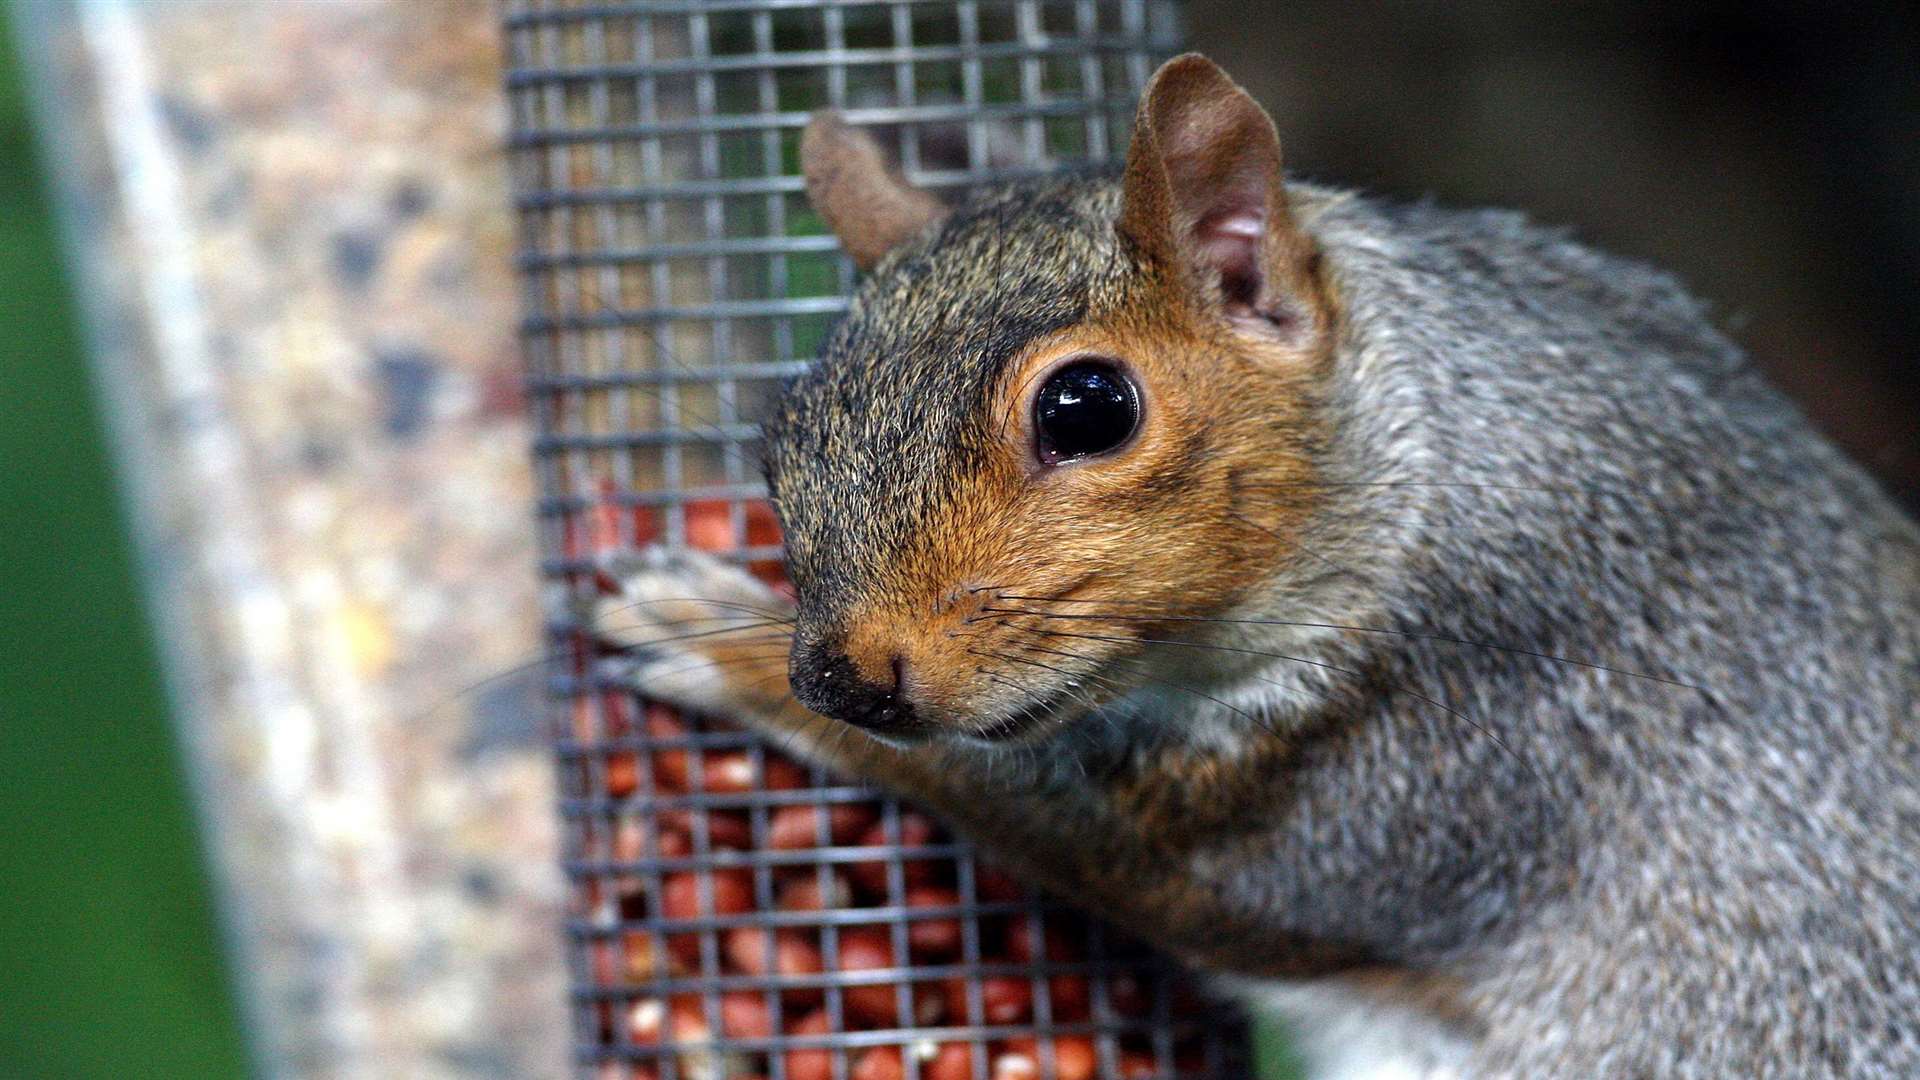 Keep an eye open for squirrels and other non-feathered visitors